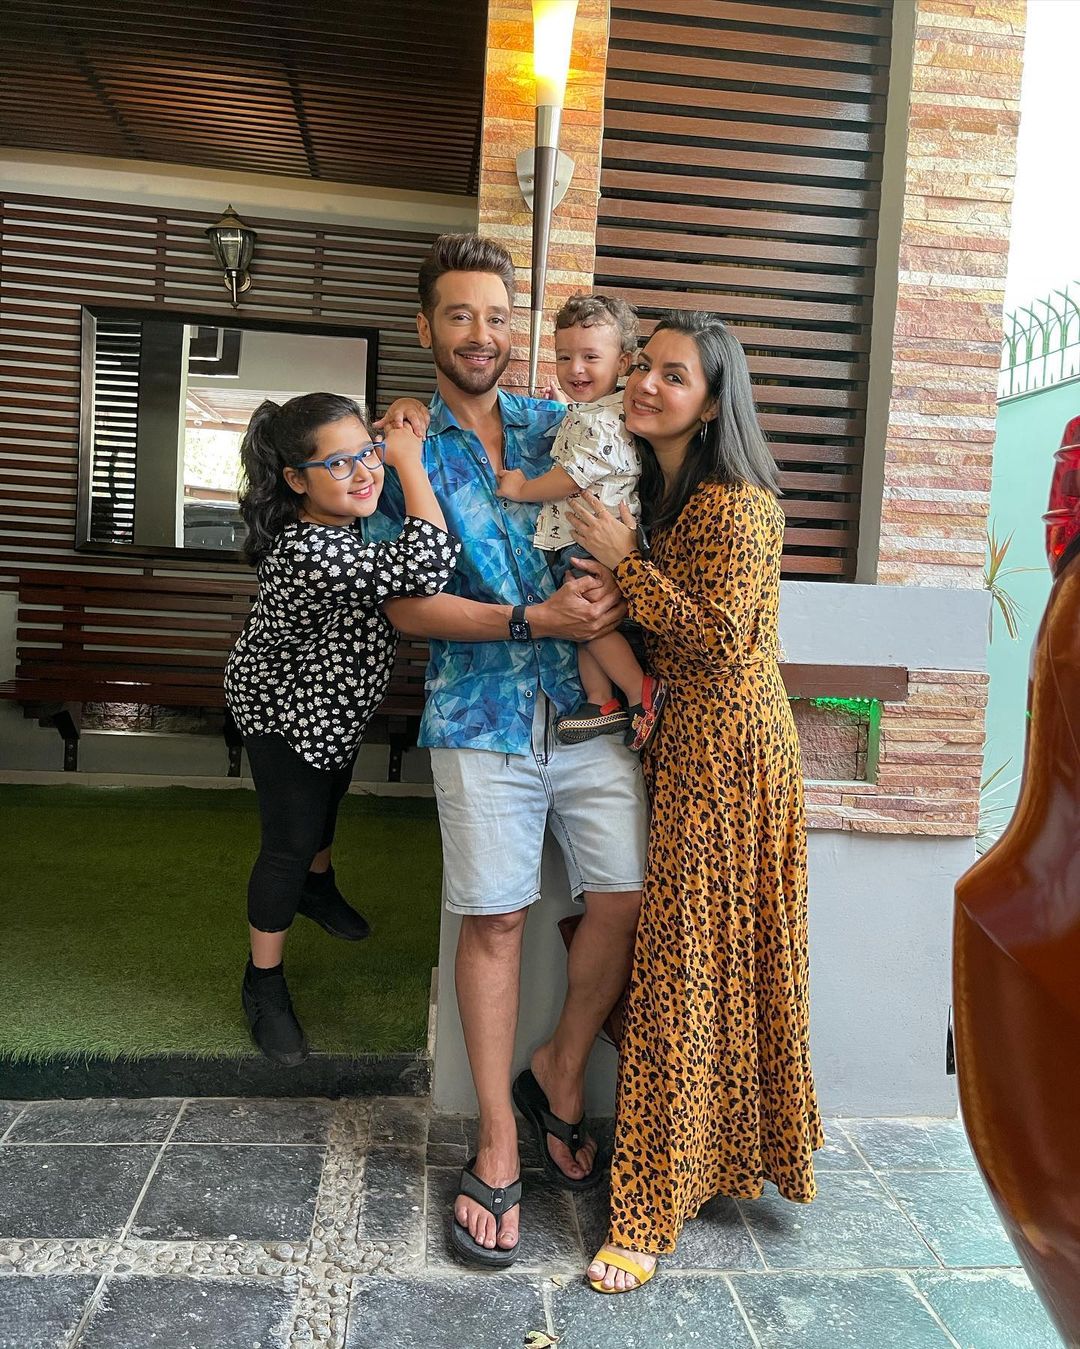 Faisal Qureshi with His Beautiful Family - New Pictures